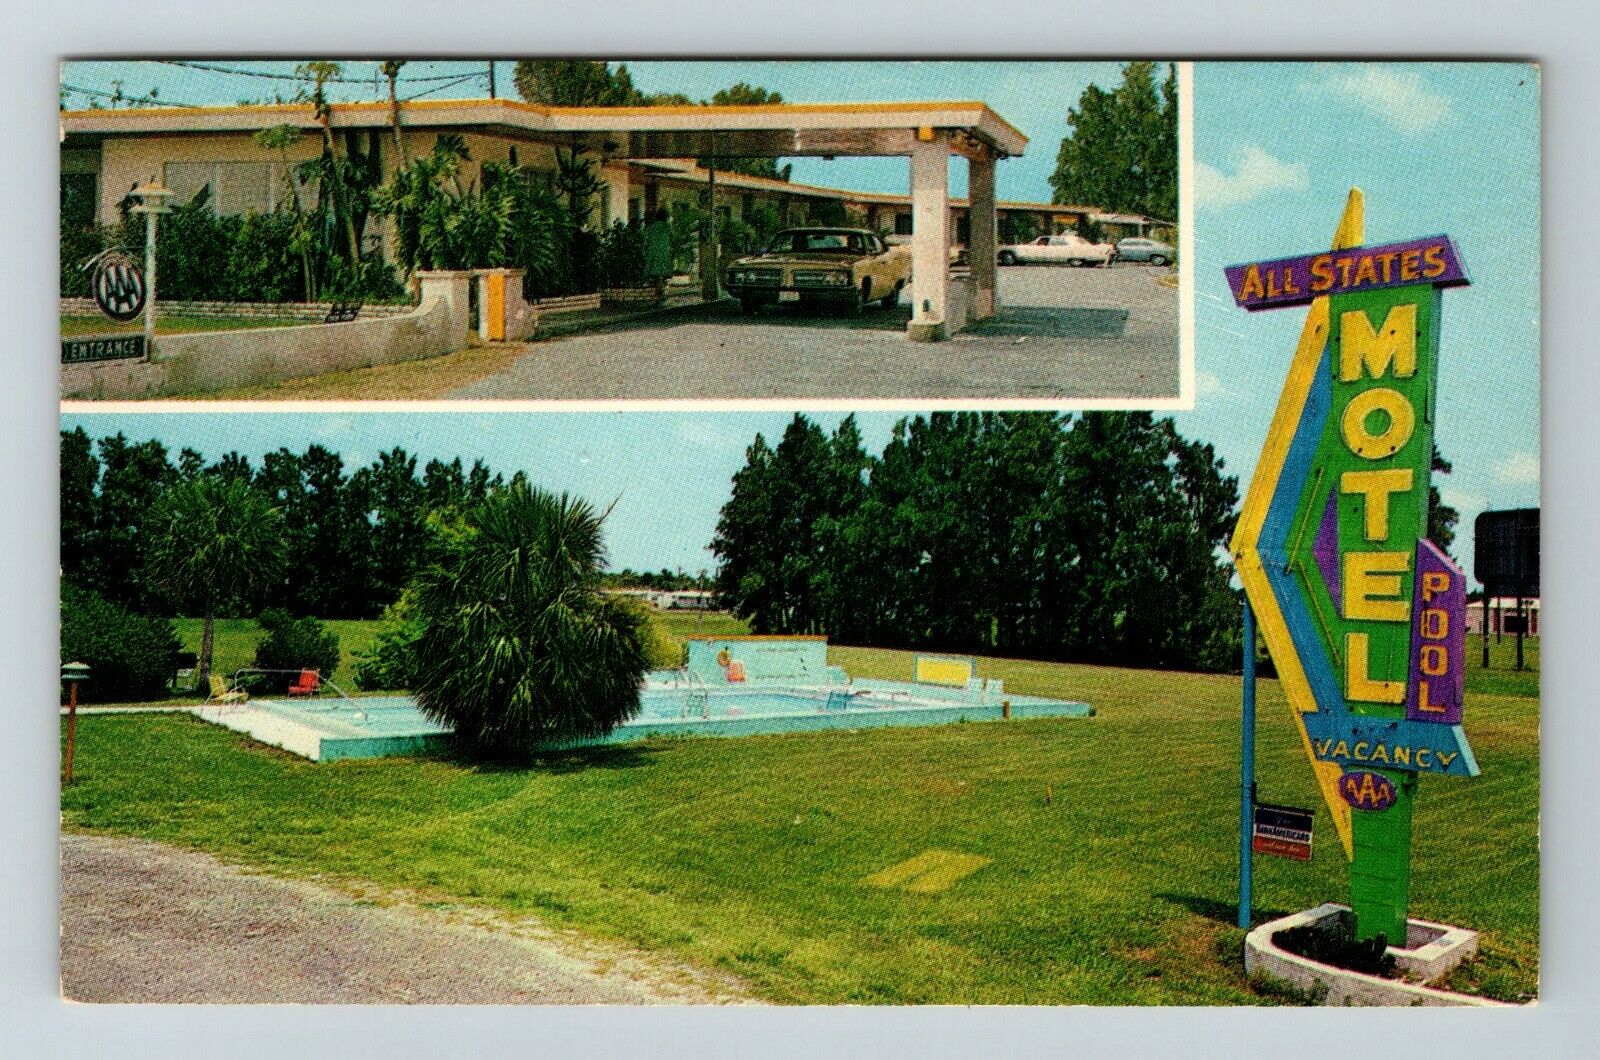 Clearwater FL-Florida, All States Motel, Scenic Sign View, Vintage Postcard